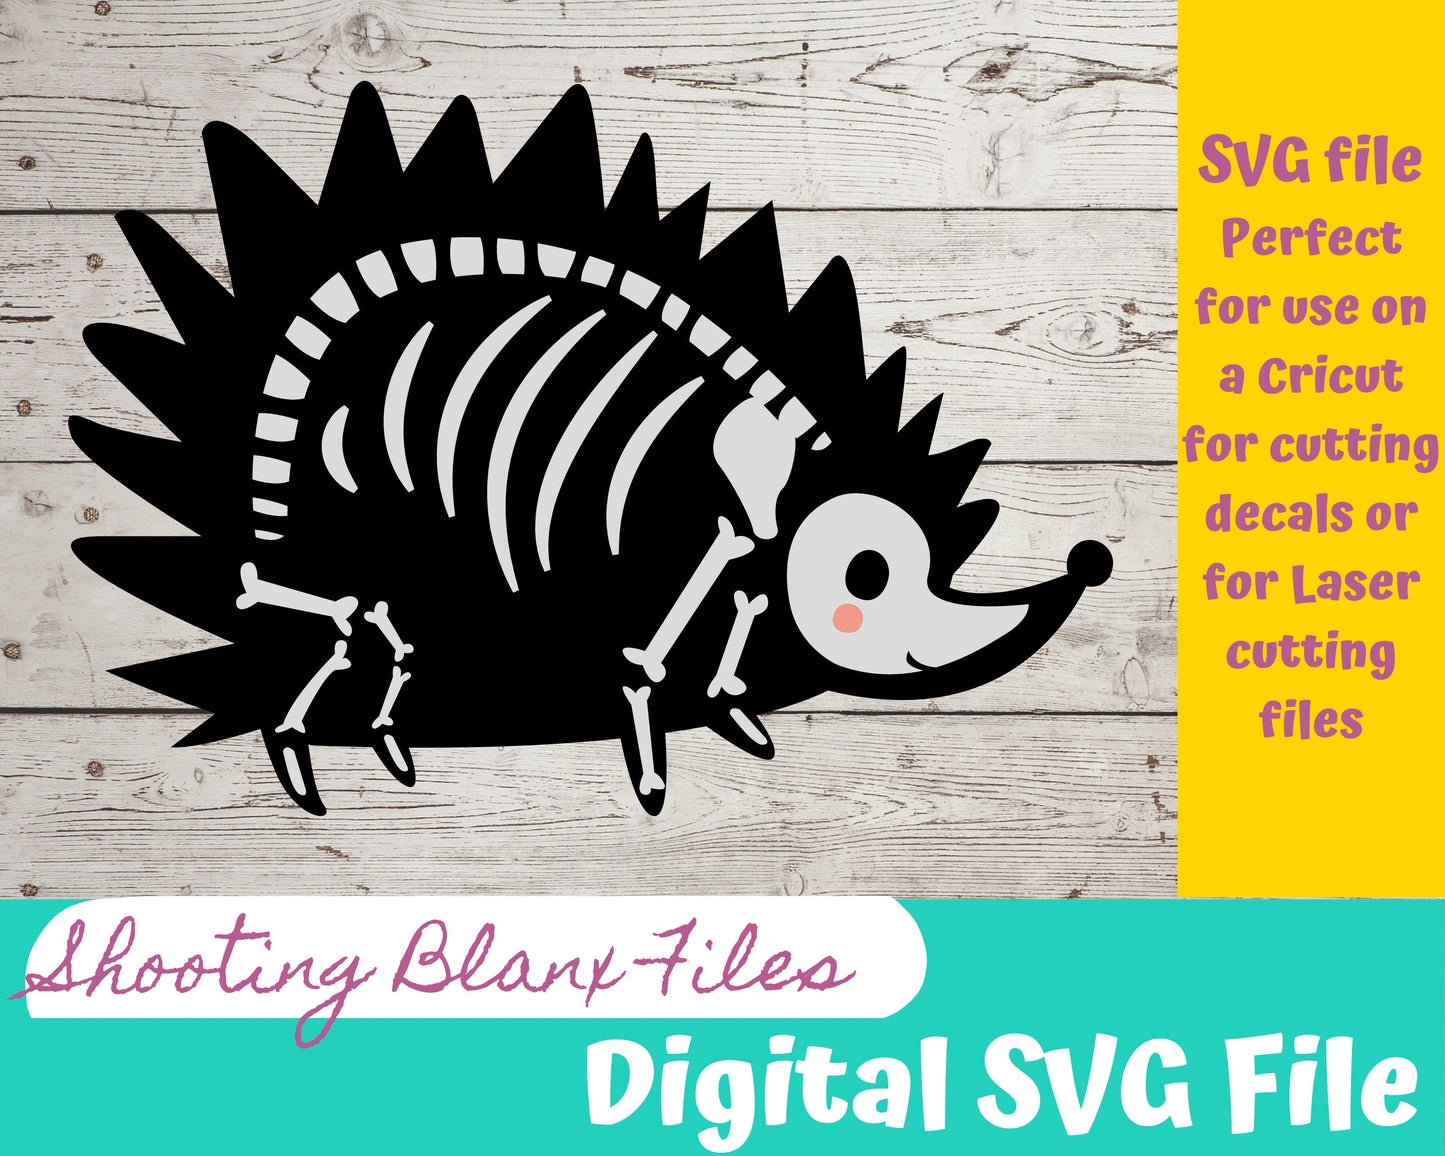 Porcupine Skeleton SVG file perfect for Cricut, Cameo, or Silhouette also for laser engraving Glowforge, Scary, Halloween, animal